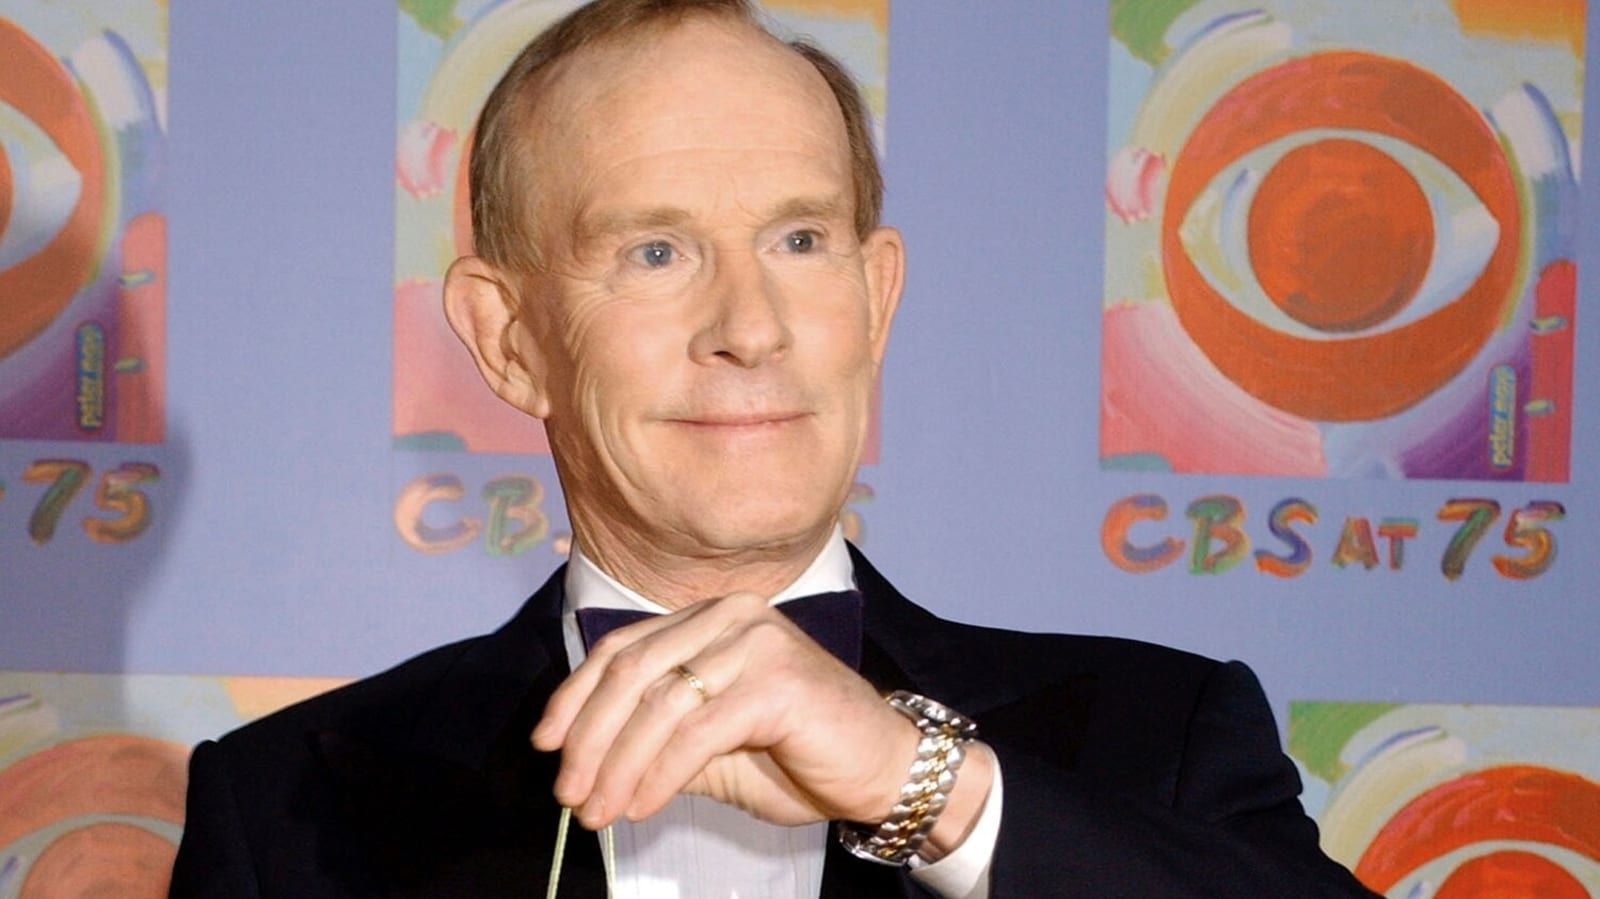 Tom Smothers dies at 86: Comedian was one half of iconic duo Smothers Brothers